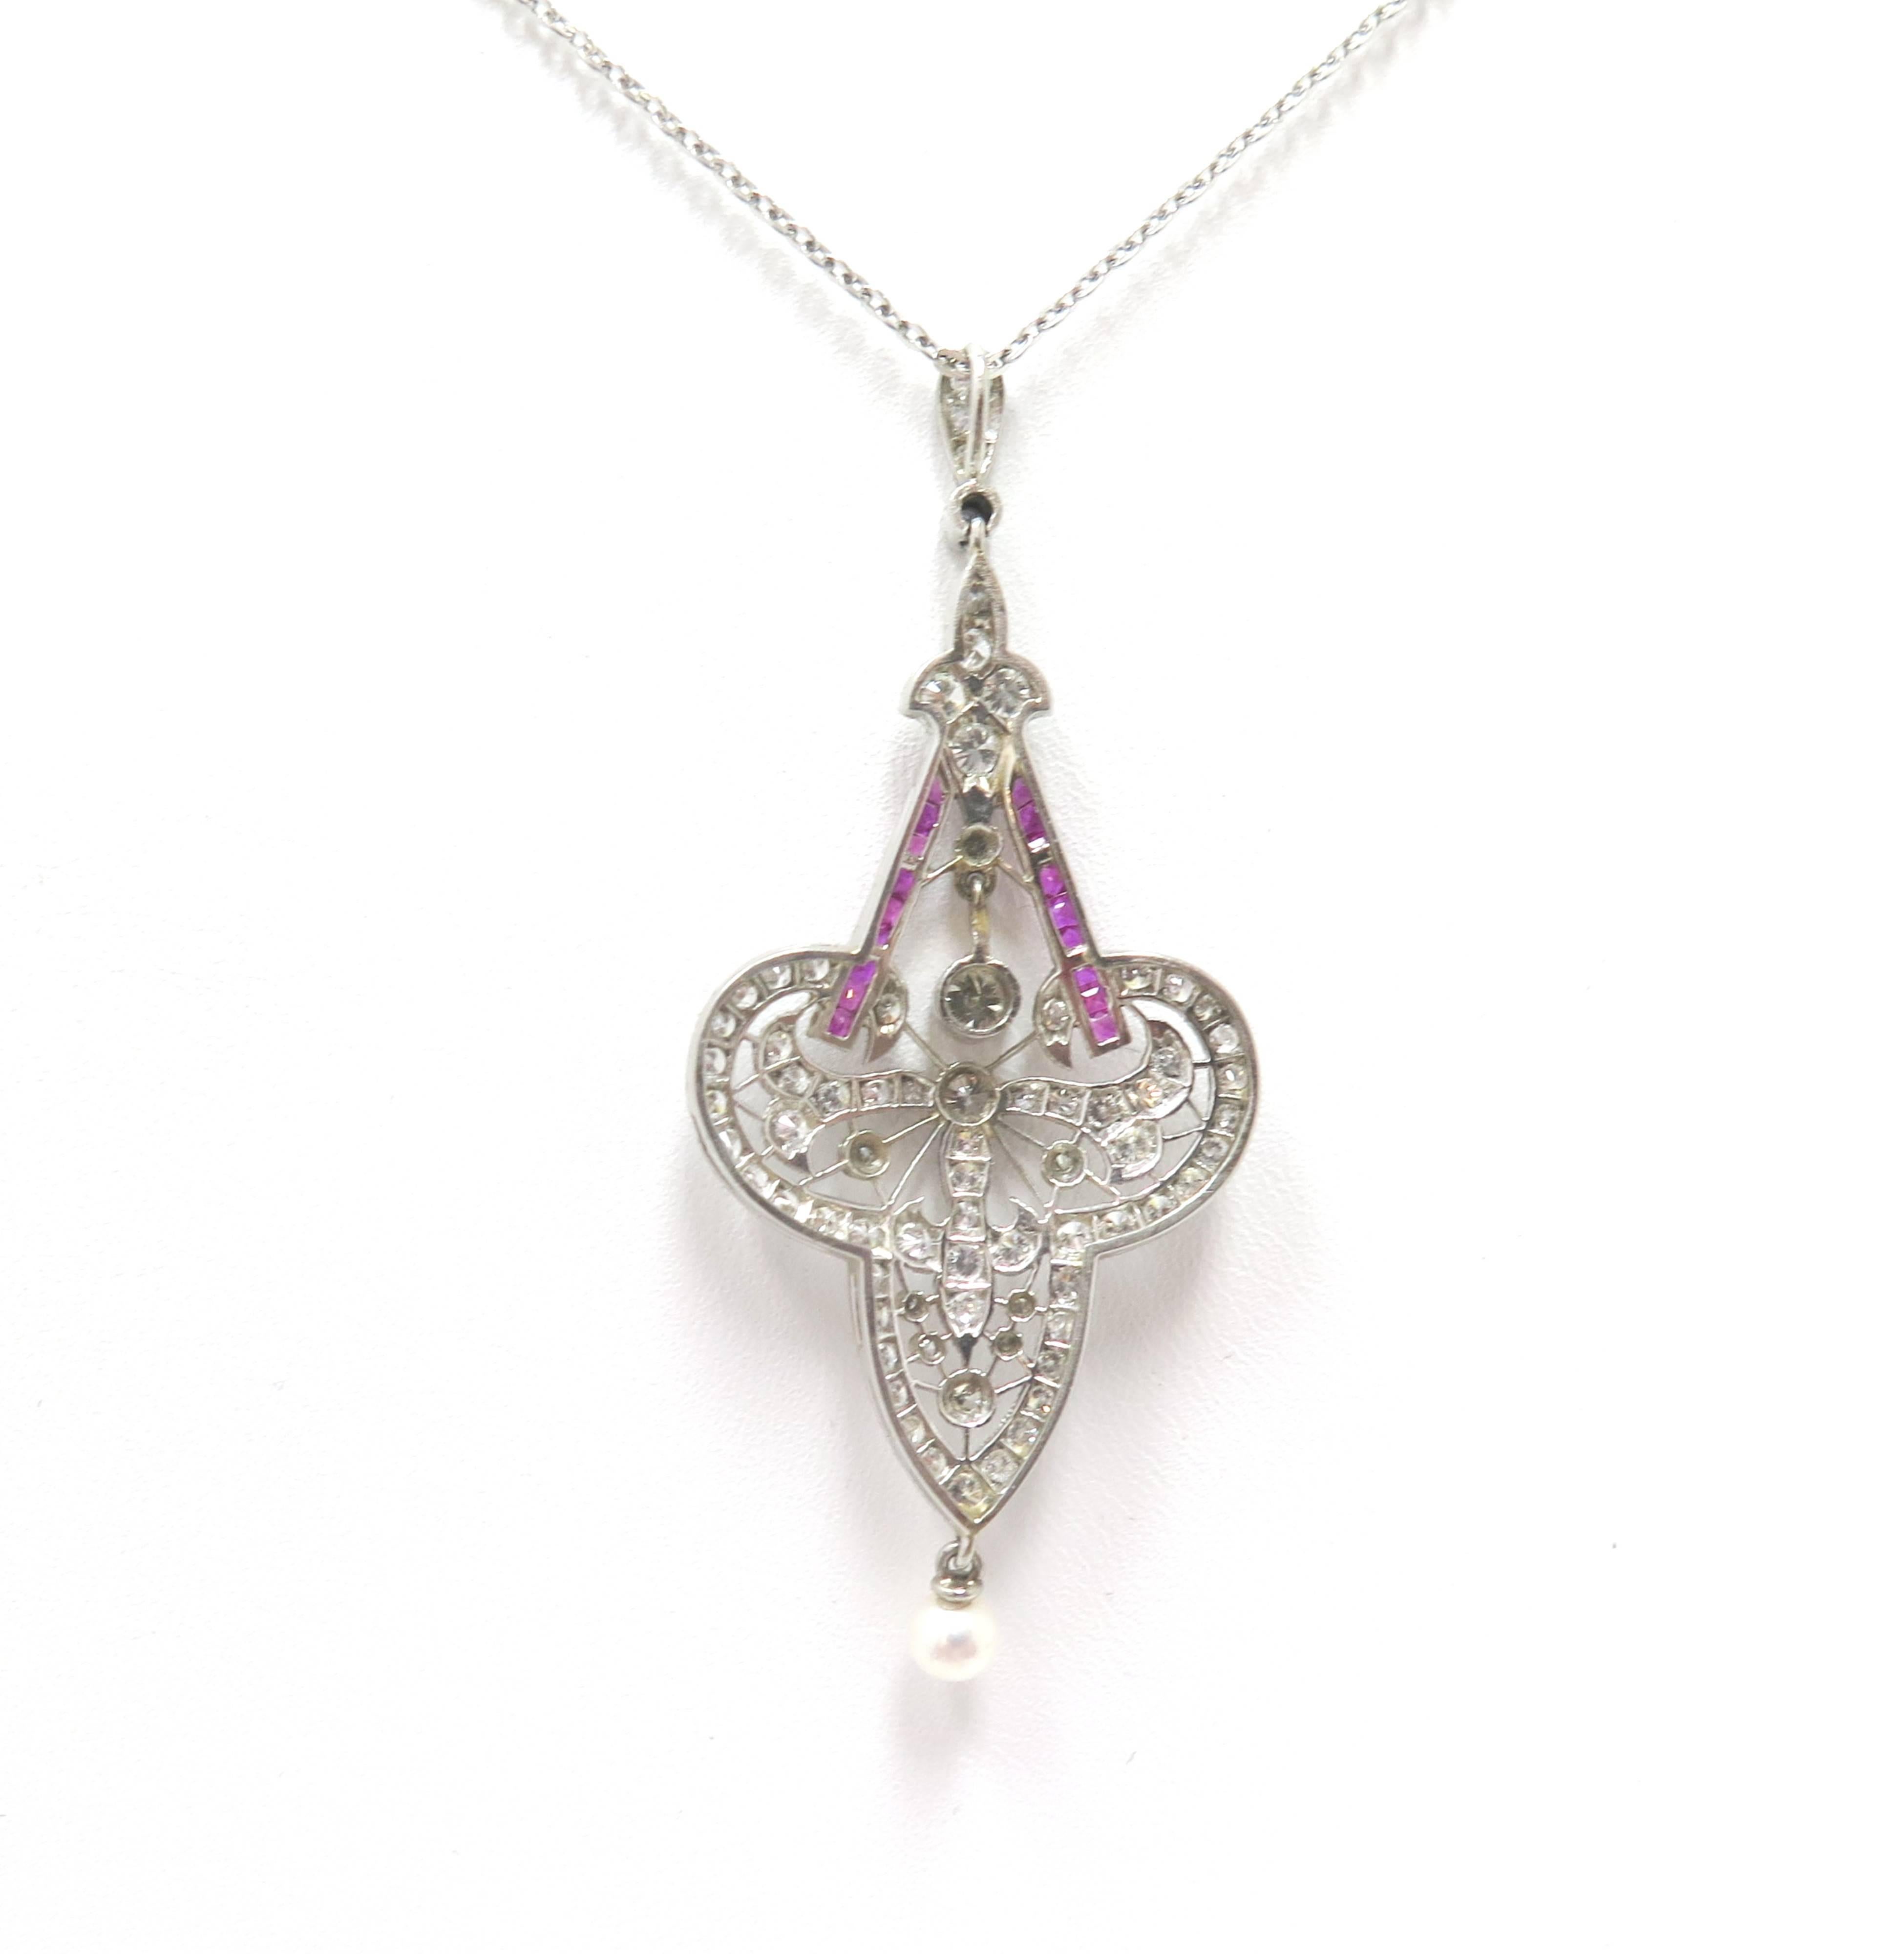 This truly unique and gorgeous antique necklace dates back to the 1920's and displays a curvaceous, classic Art Nouveau motif with sparkling diamonds, luscious rubies, and one dangling cultured pearl. 

A magical one-of-a-kind jewel.

Platinum
Comes